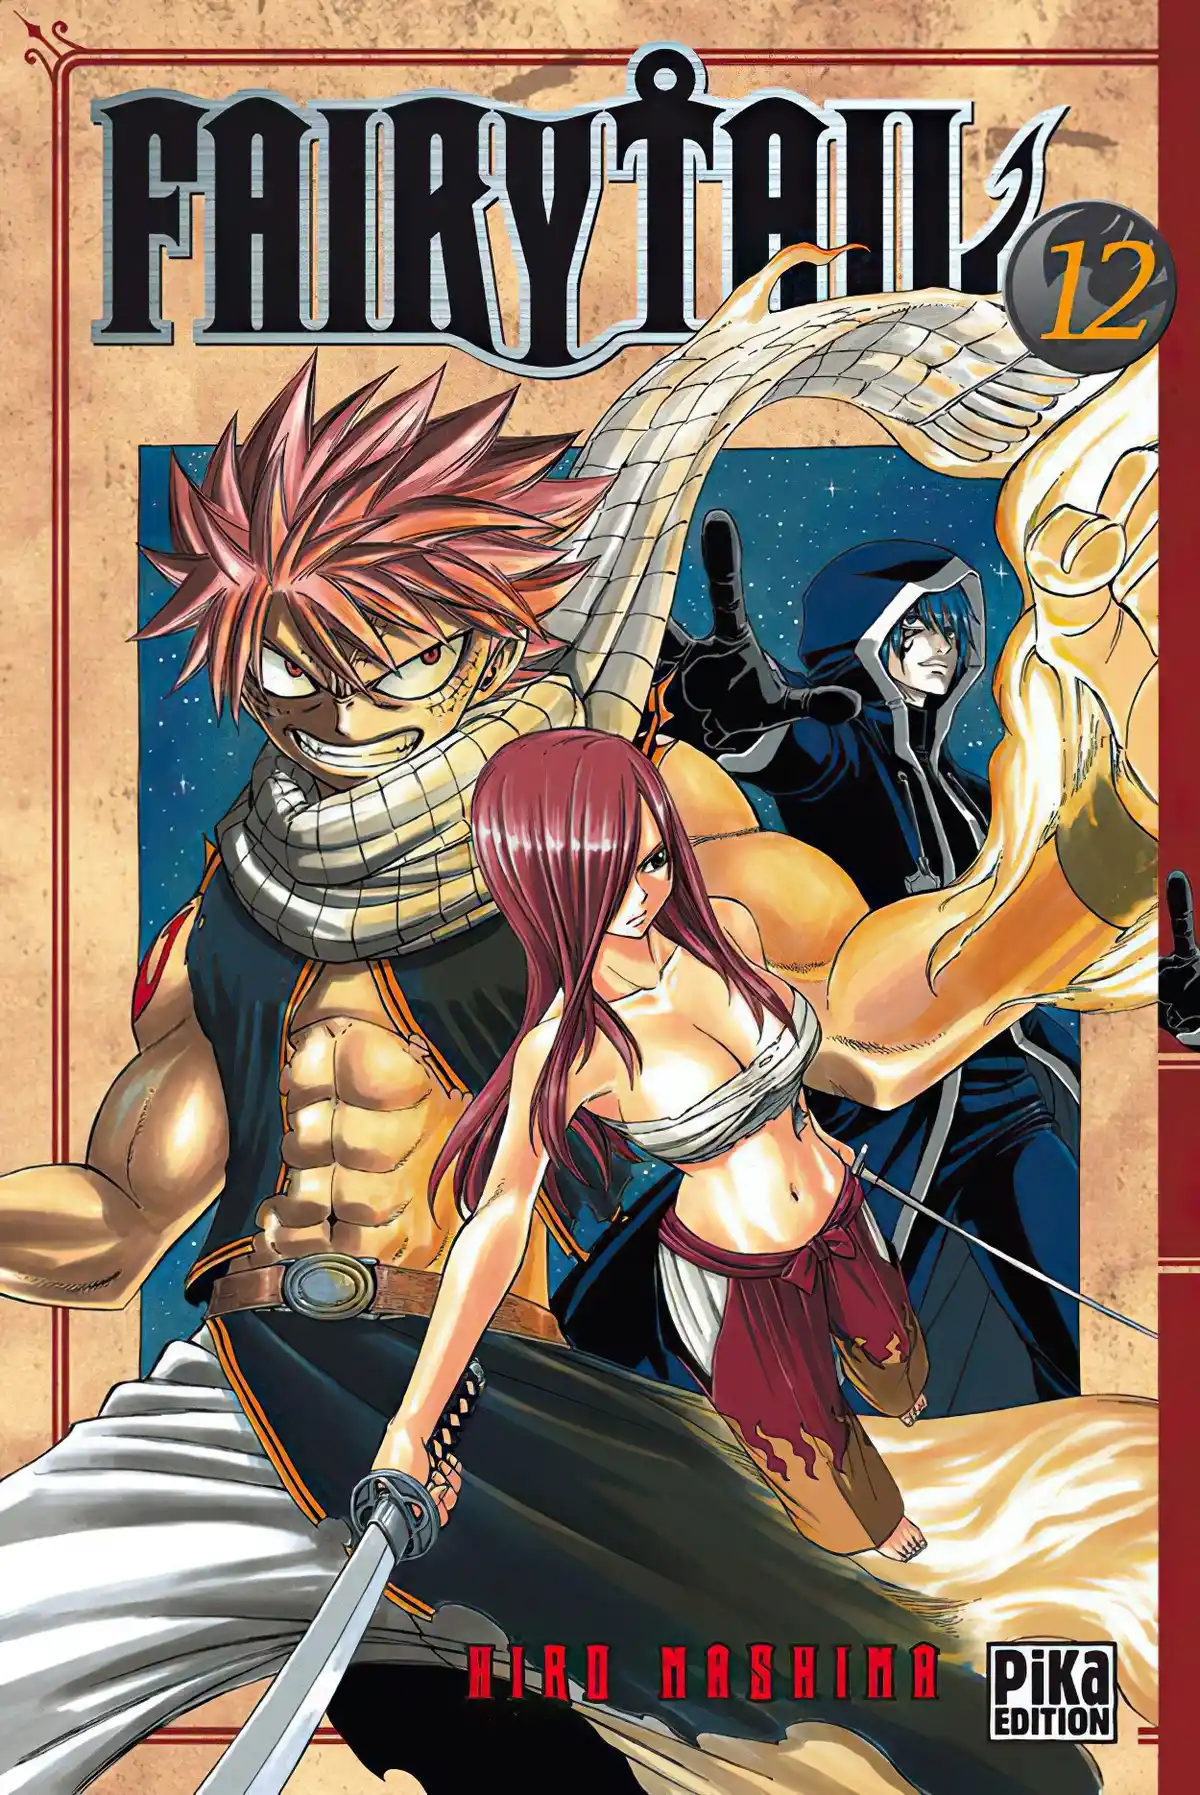 Fairy Tail Volume 12 page 1